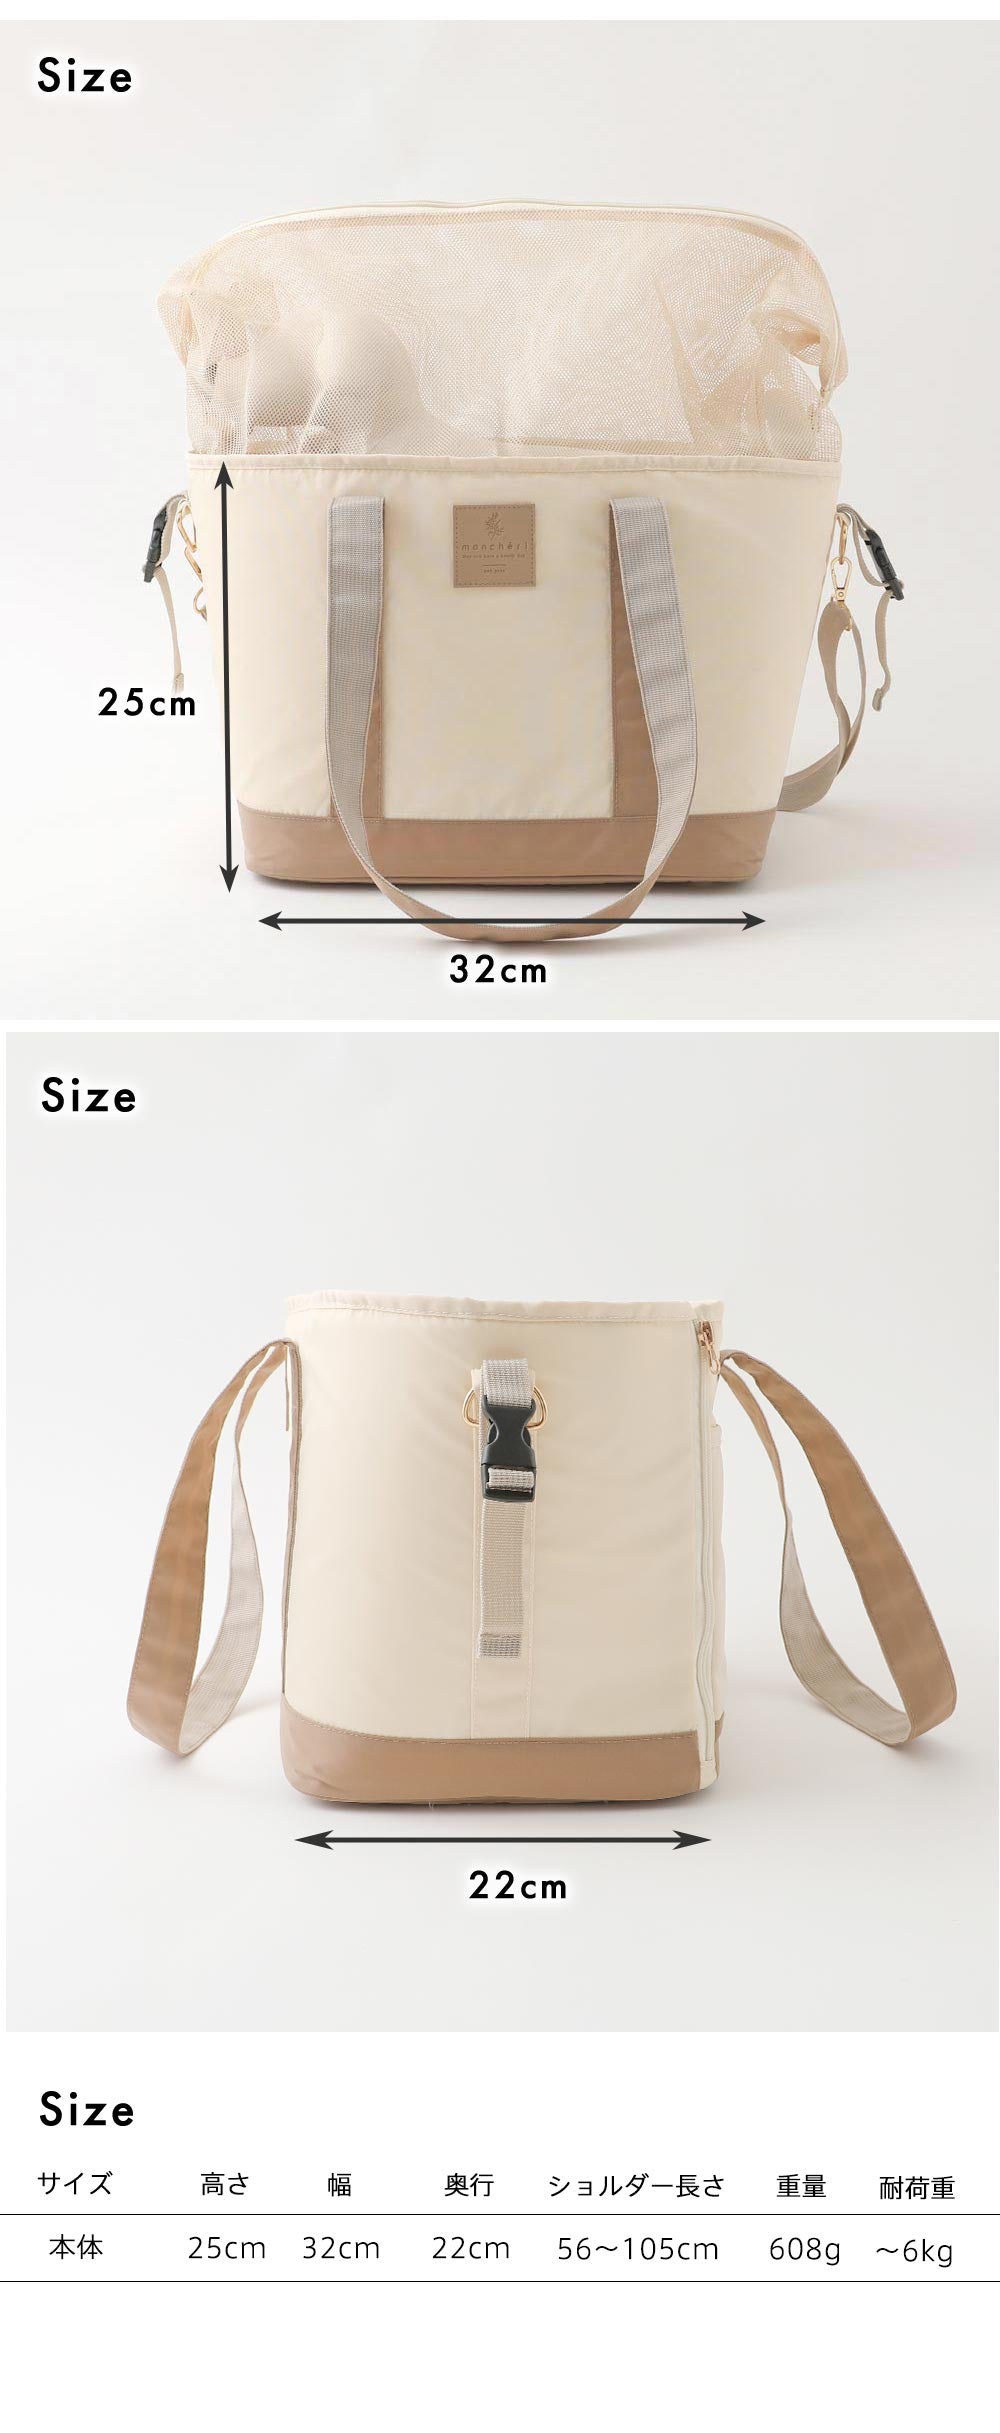 Small dog/bag/bicycle/carry back/size